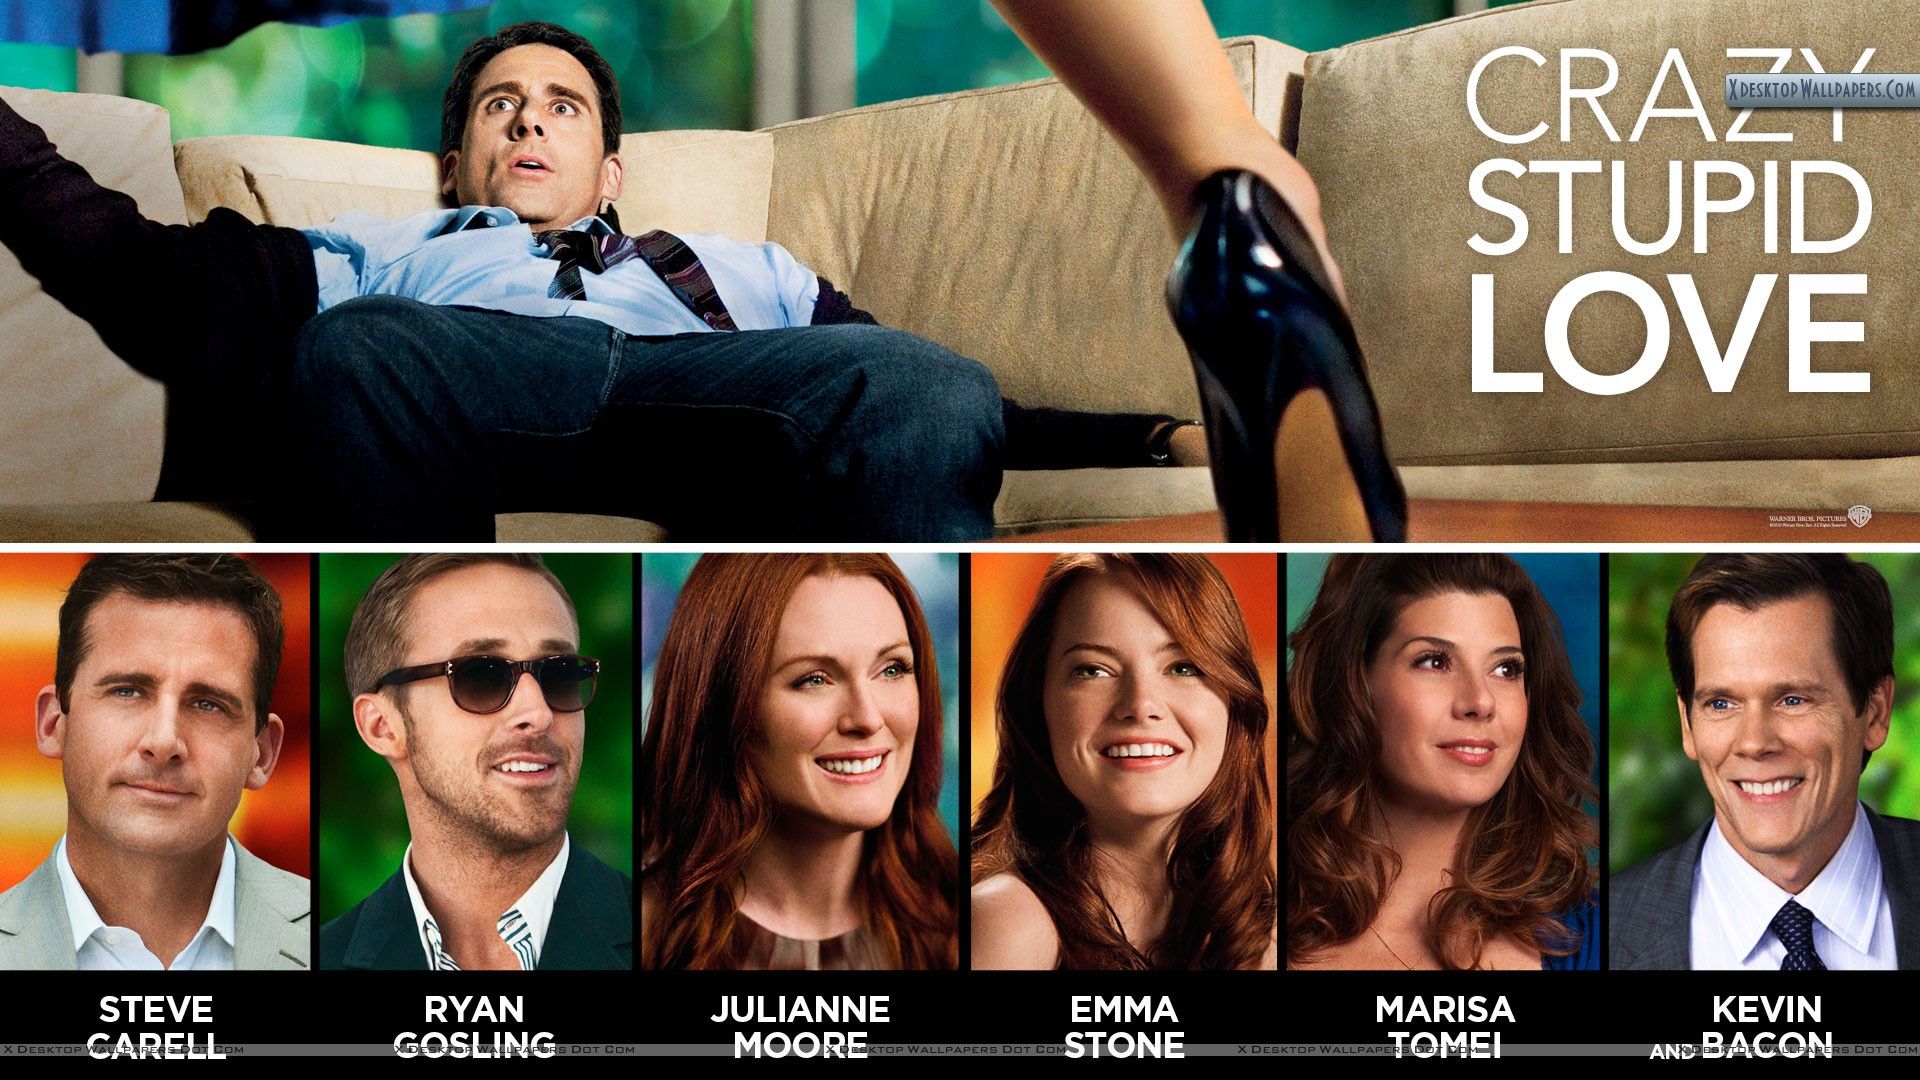 Crazy Stupid Love Wallpaper, Photo & Image in HD